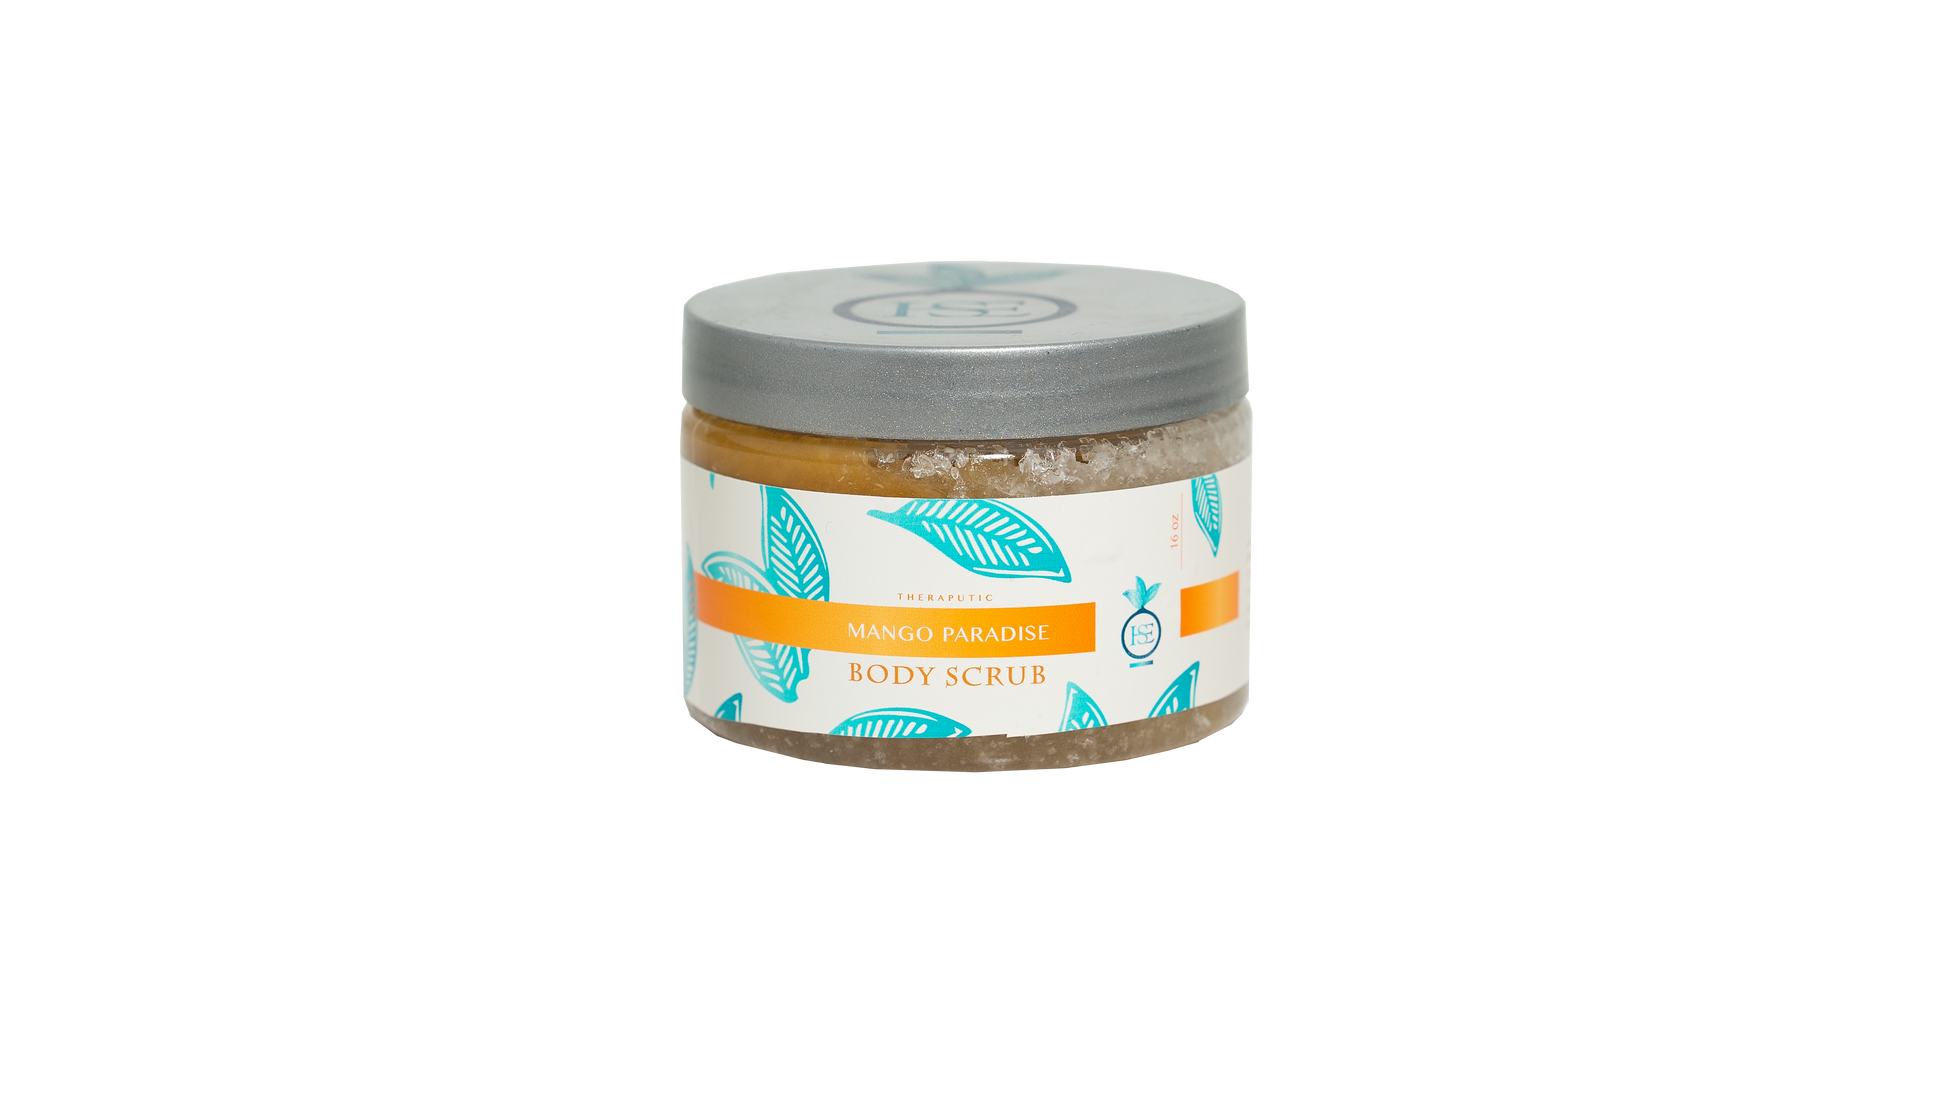 A closed 16 oz. jar of Mango Paradise body scrub is showcased against a transparent background, emphasizing the product's vibrant packaging.